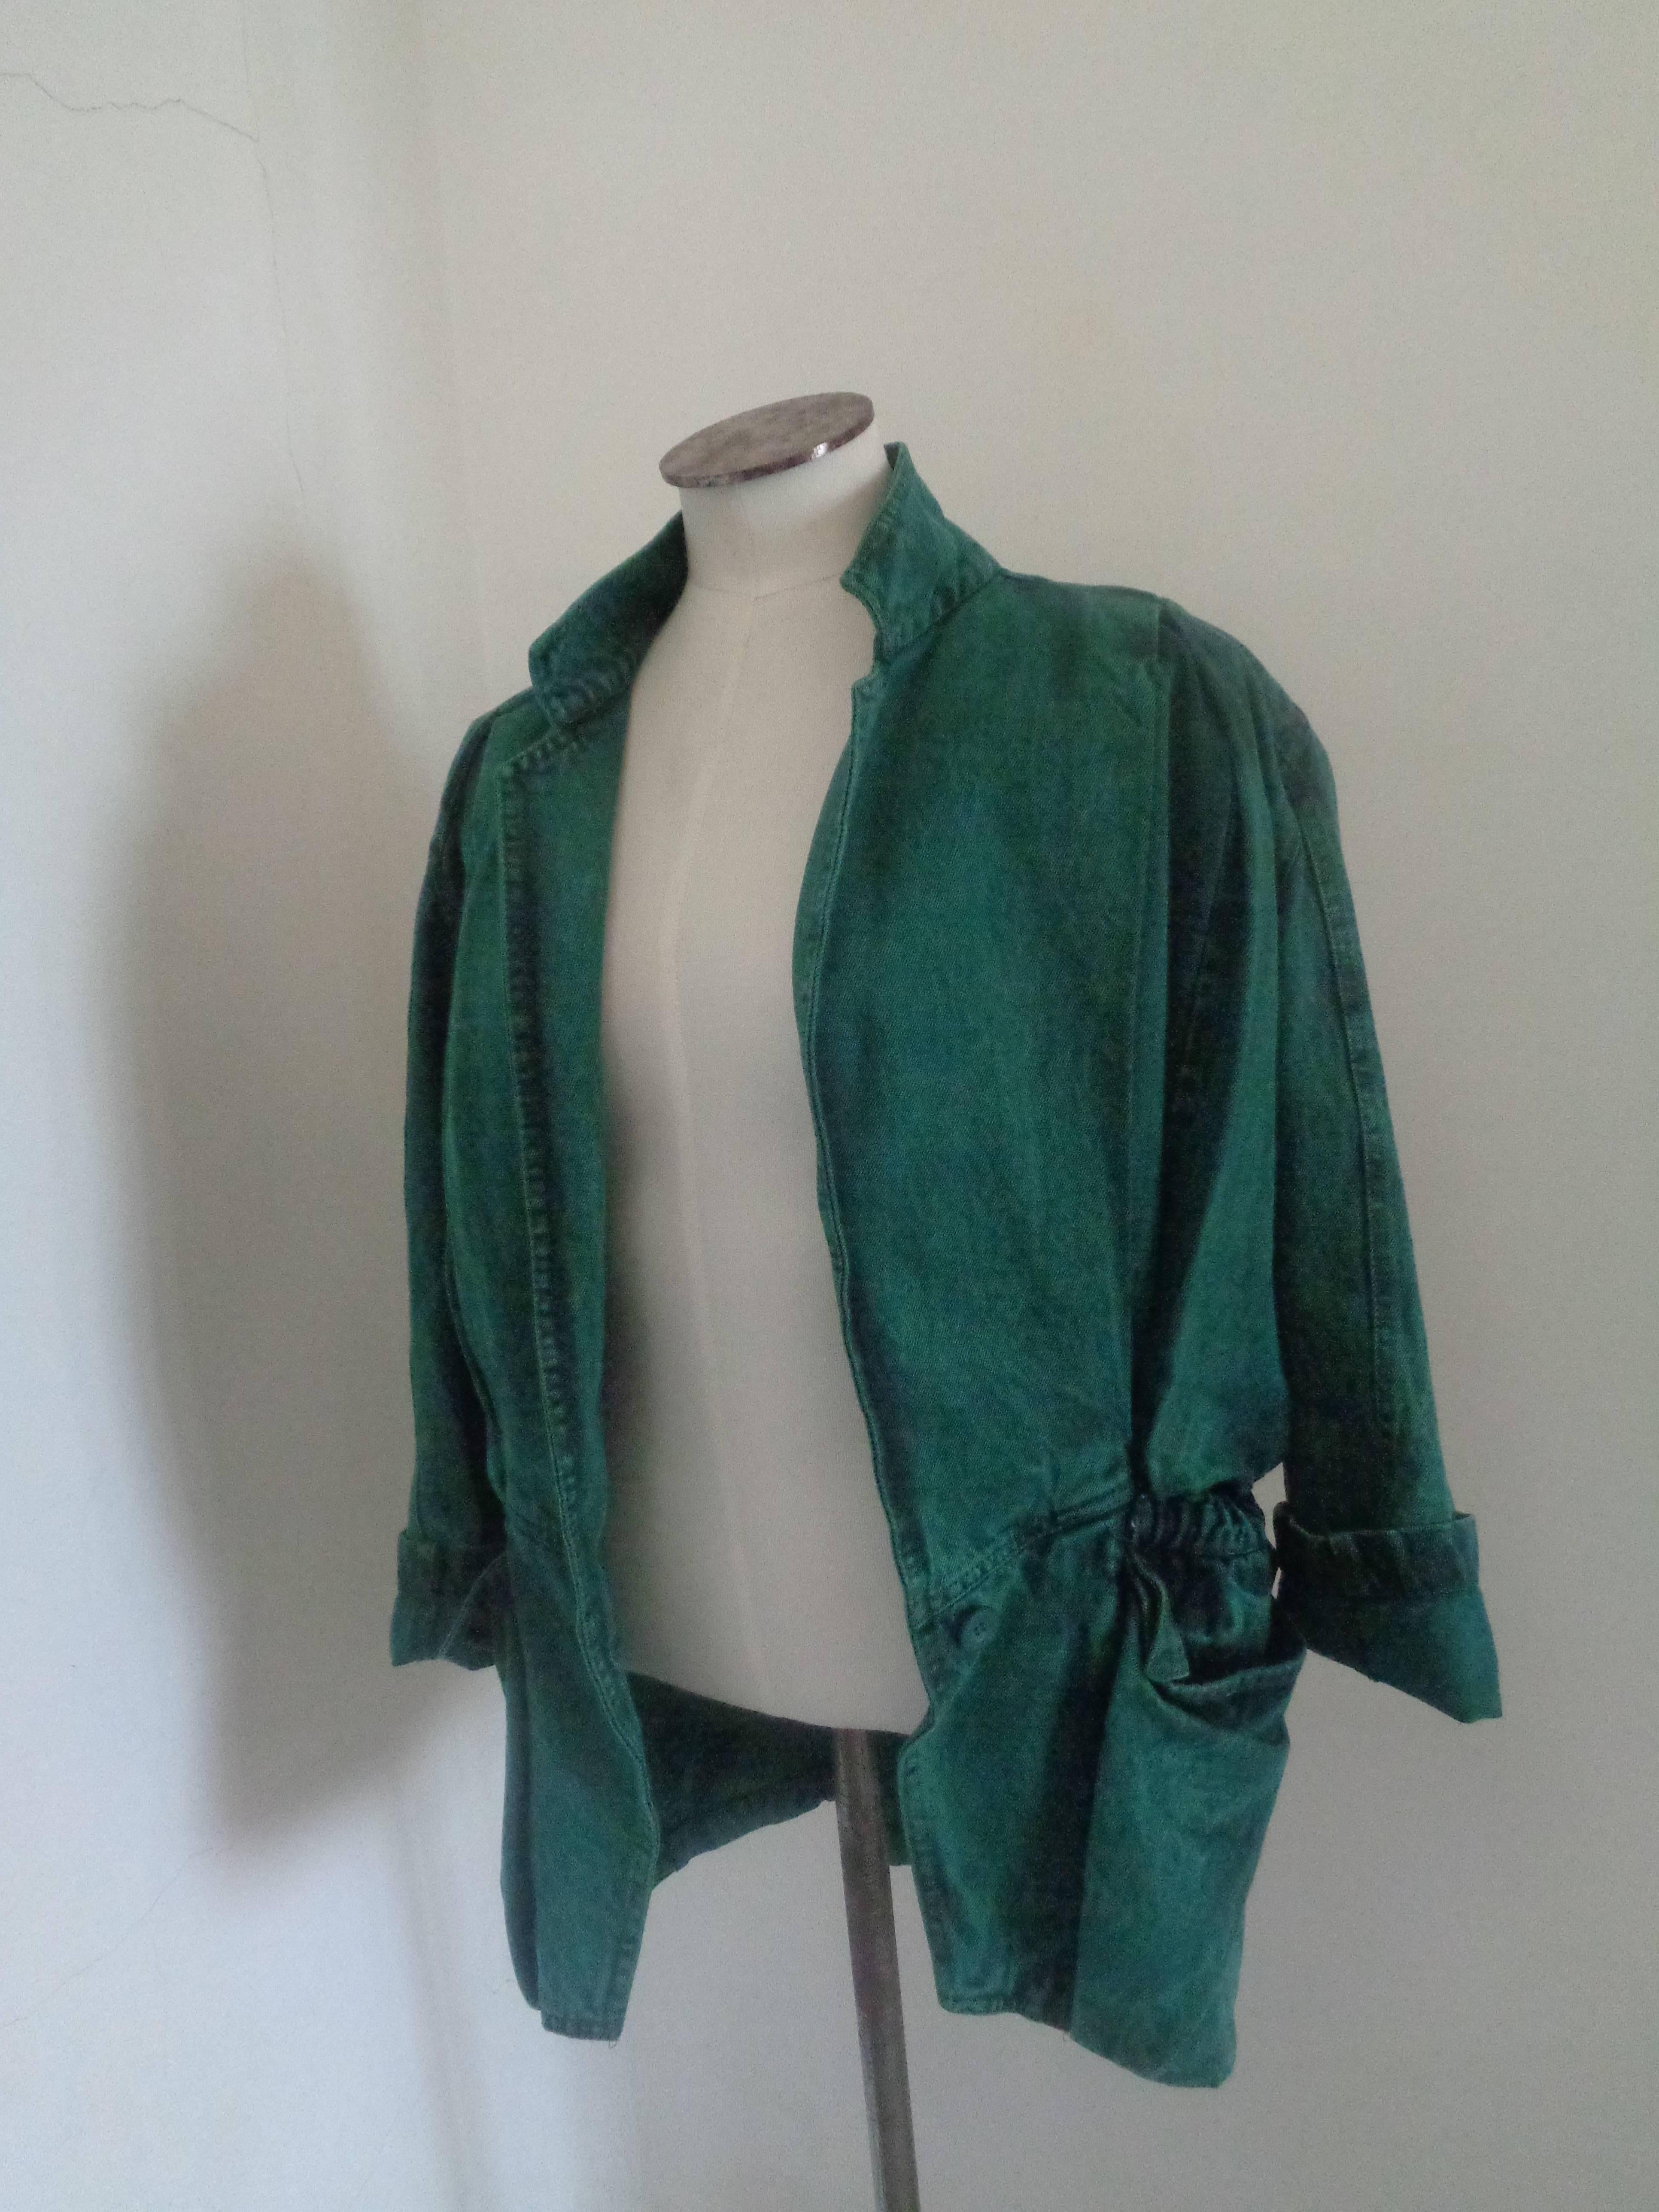 1970s Pancaldi Green Jacket
Totally made in italy in italian size range 42